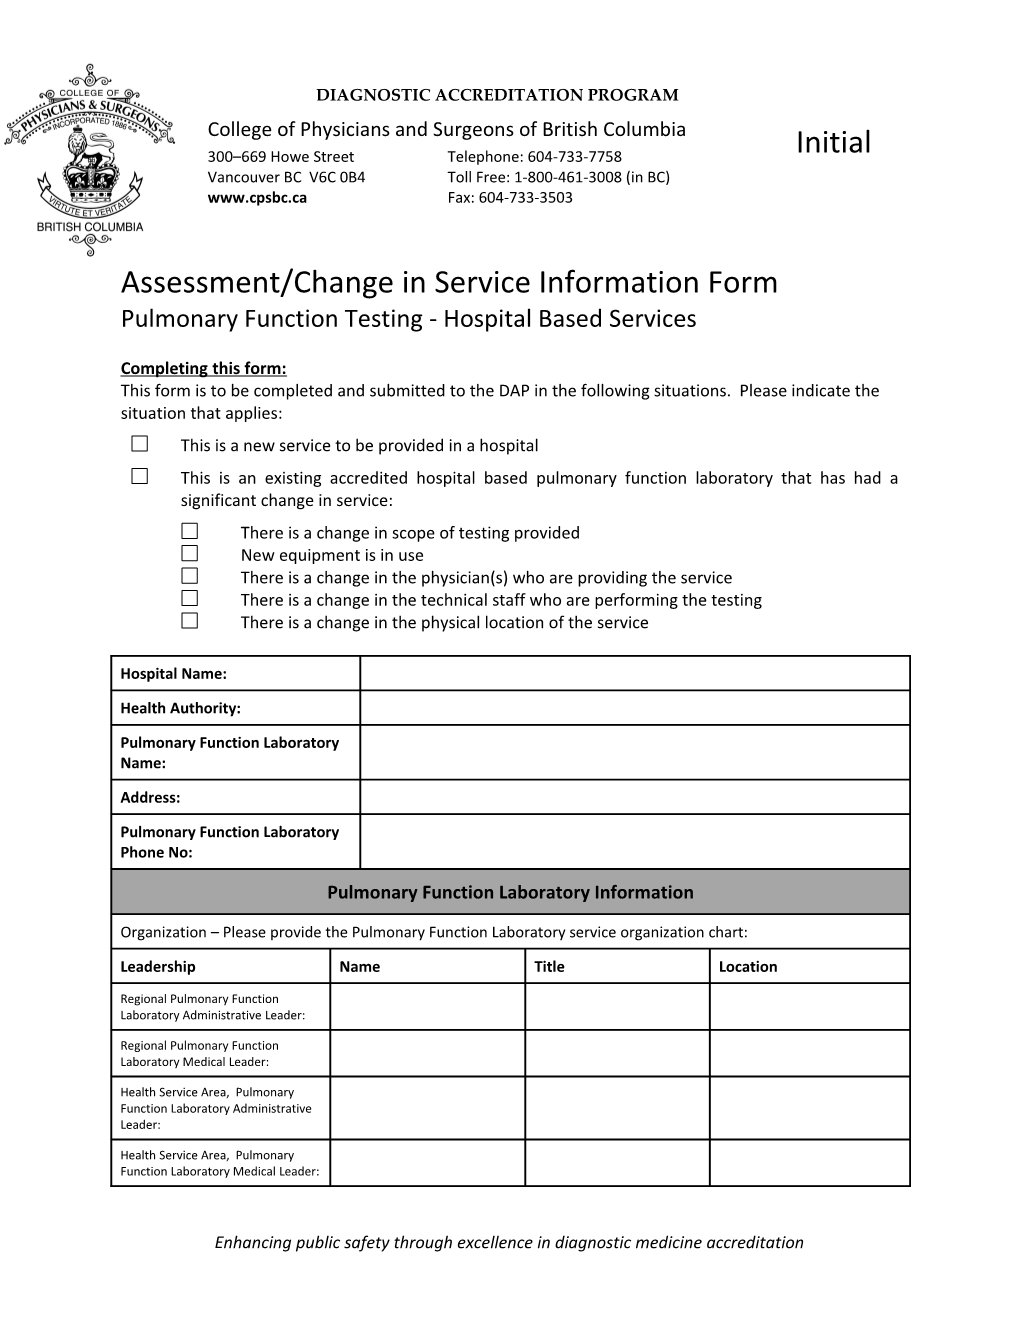 Initial Assessment/Change in Service Information Form